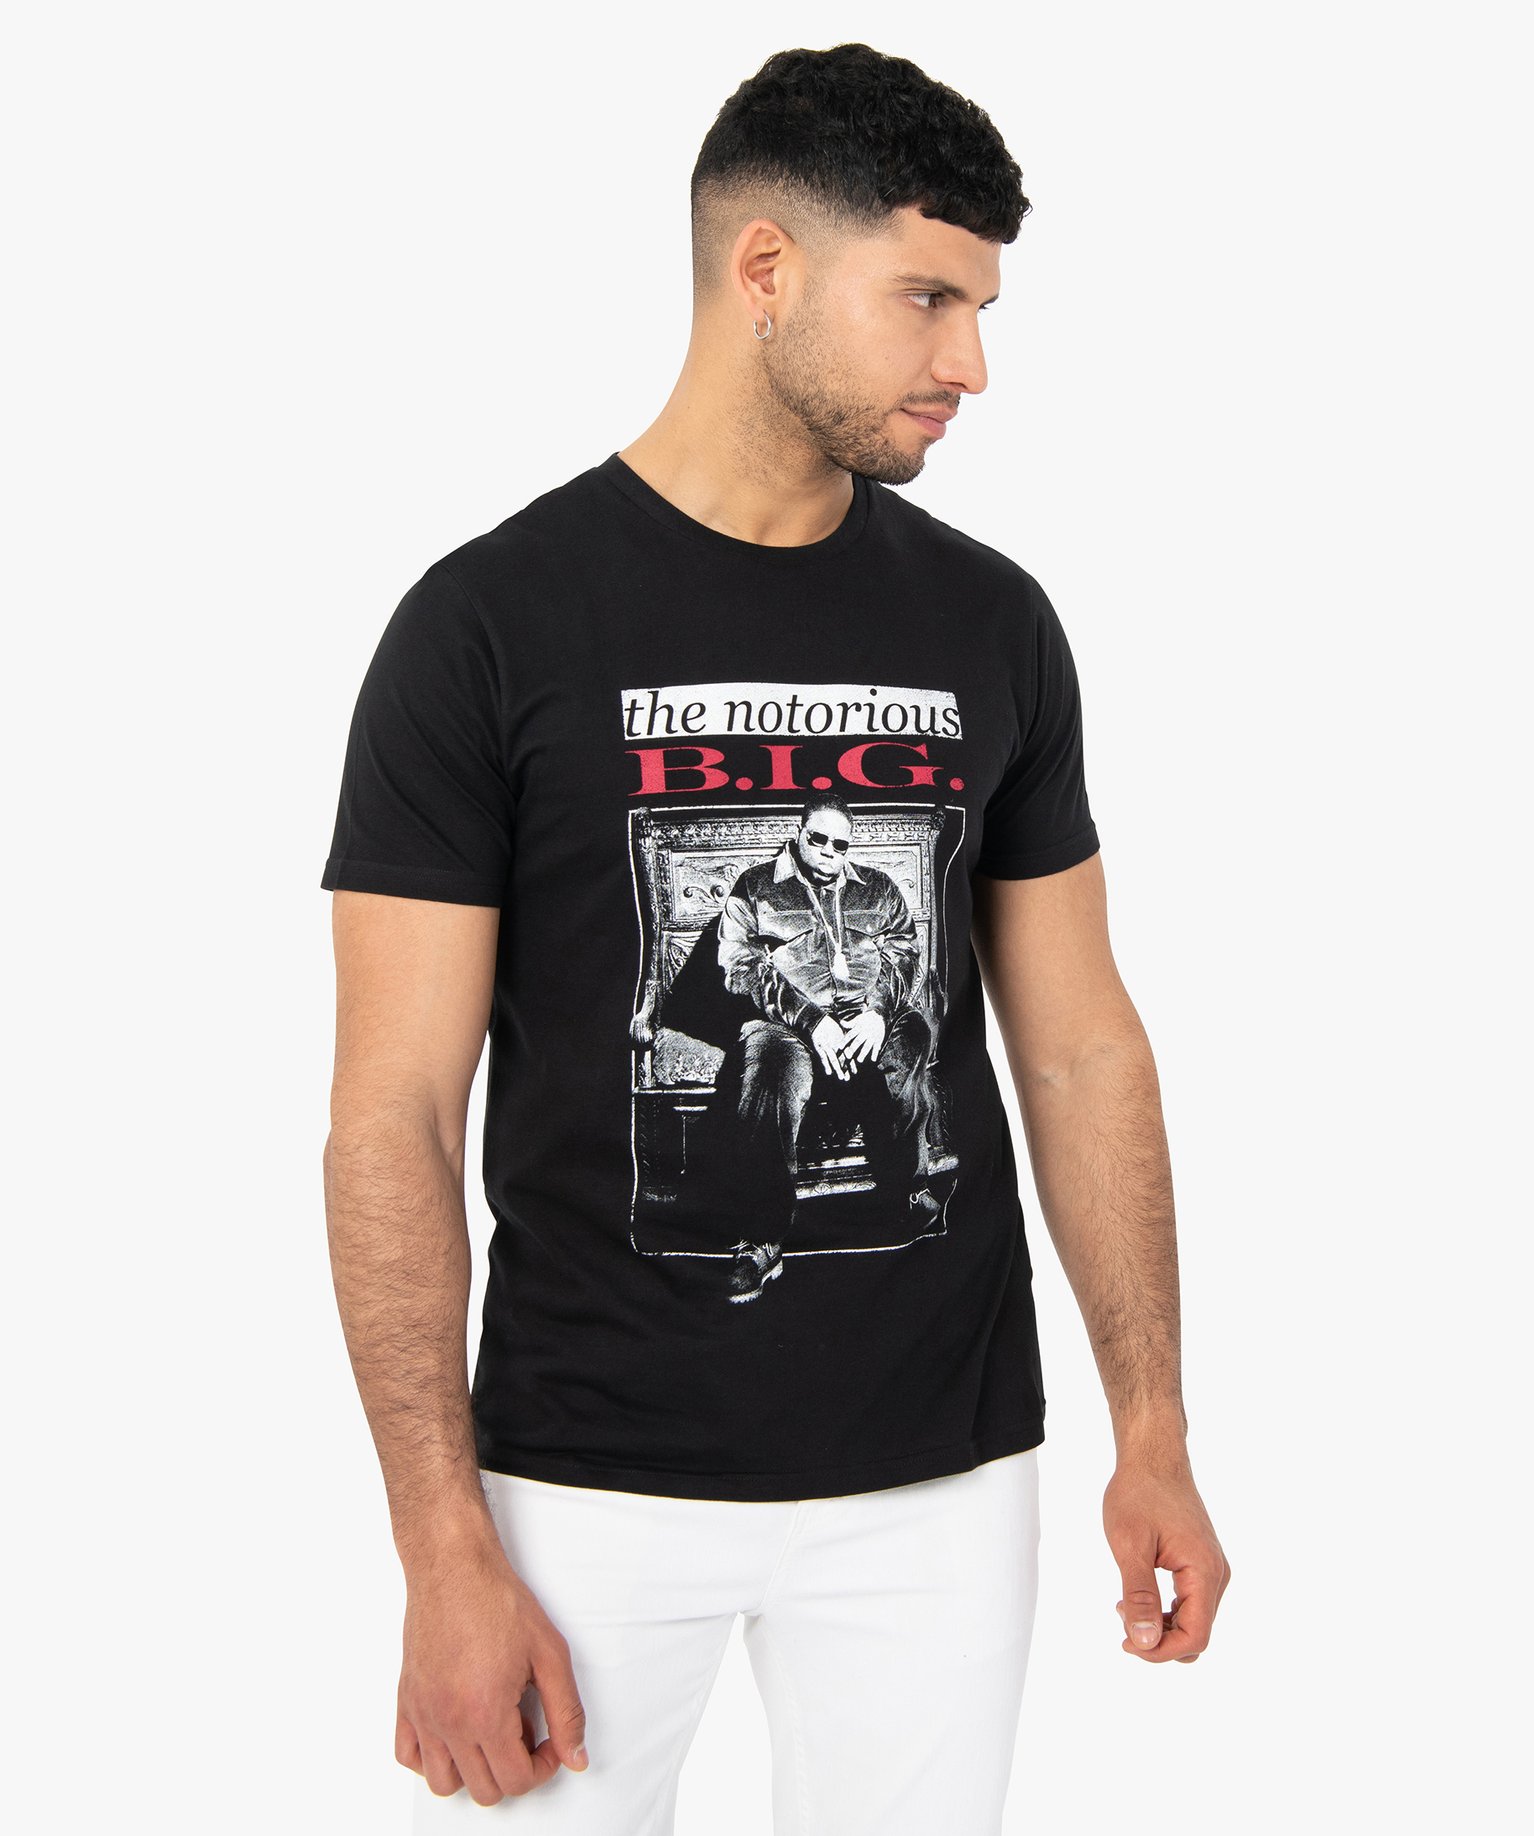 tee-shirt homme a manches courtes - the notorious big noir tee-shirts